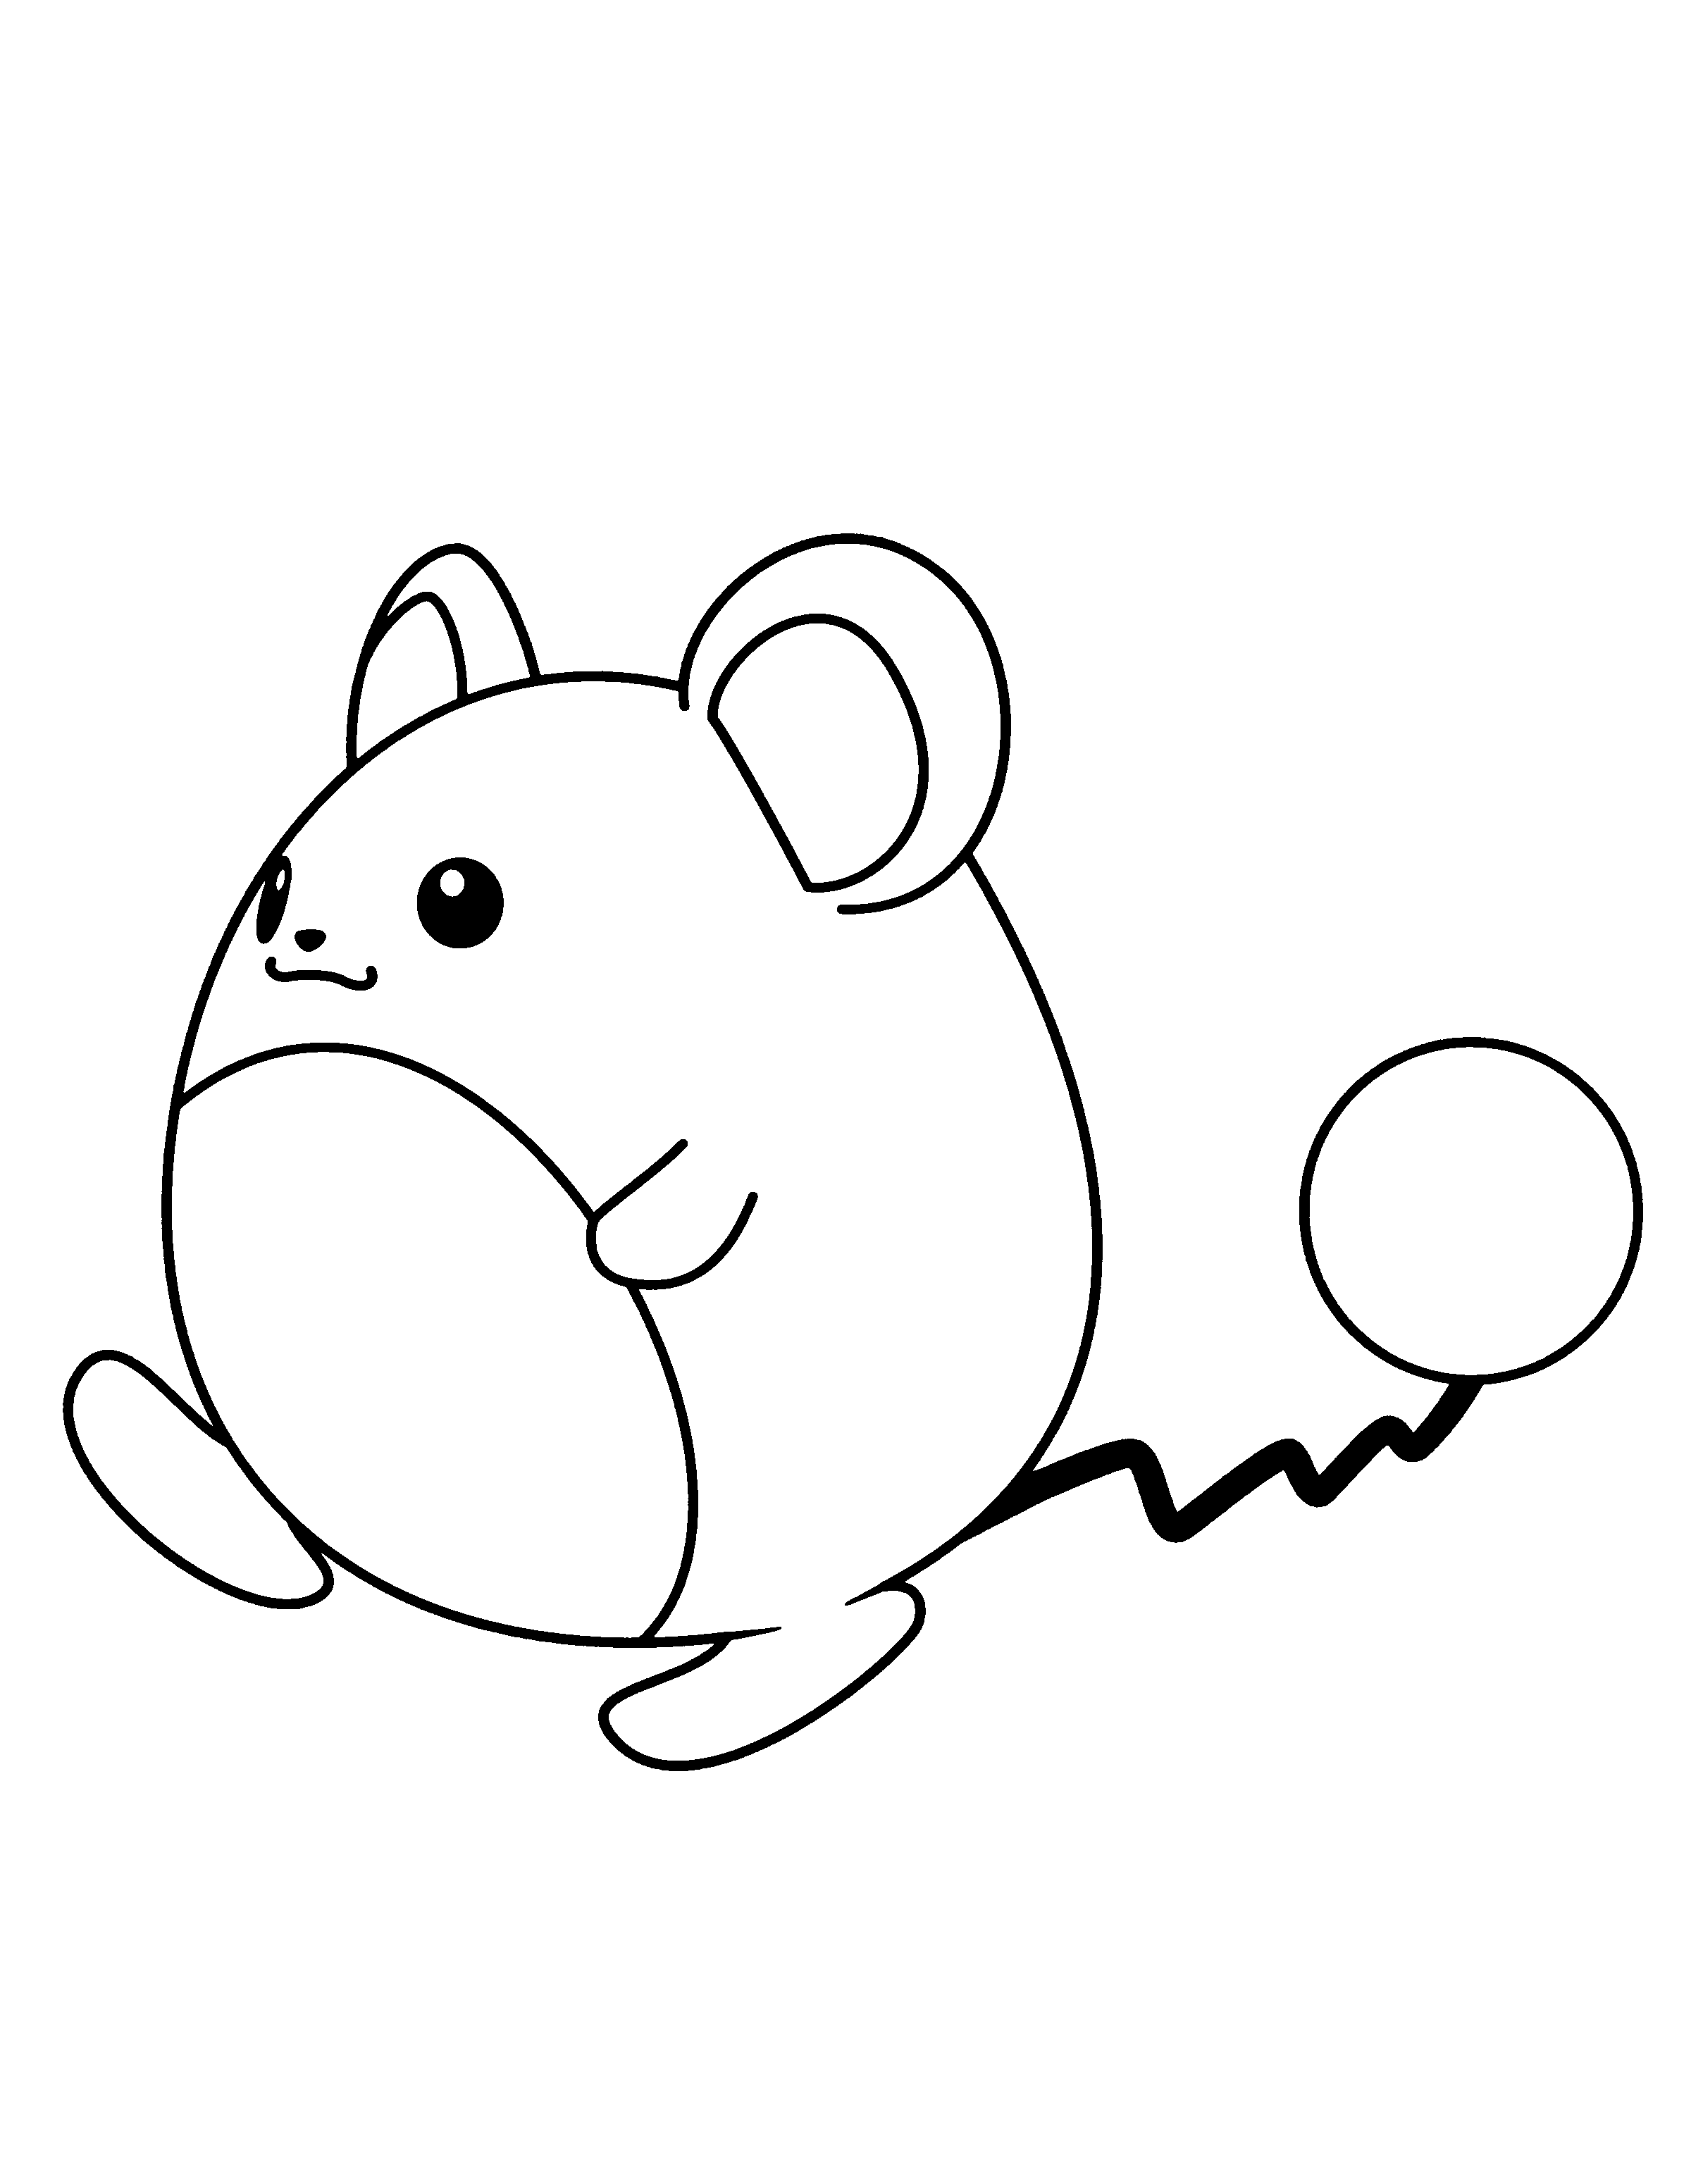 animated-coloring-pages-pokemon-image-0186